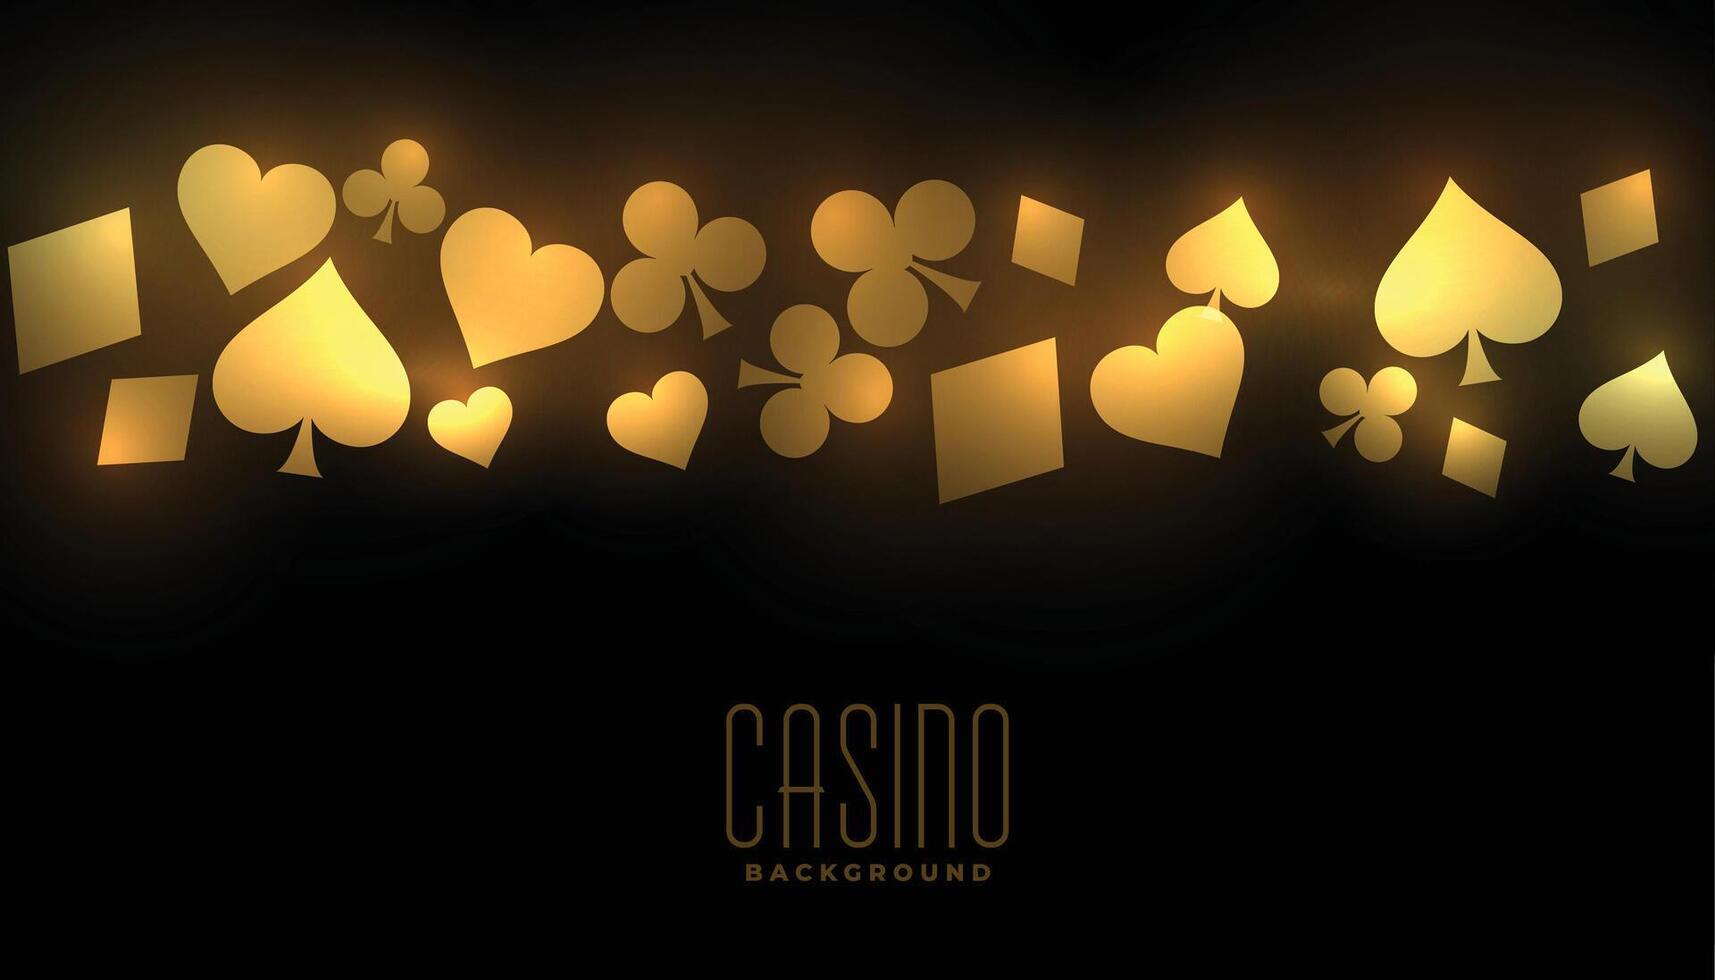 golden casino background with card suit symbols vector